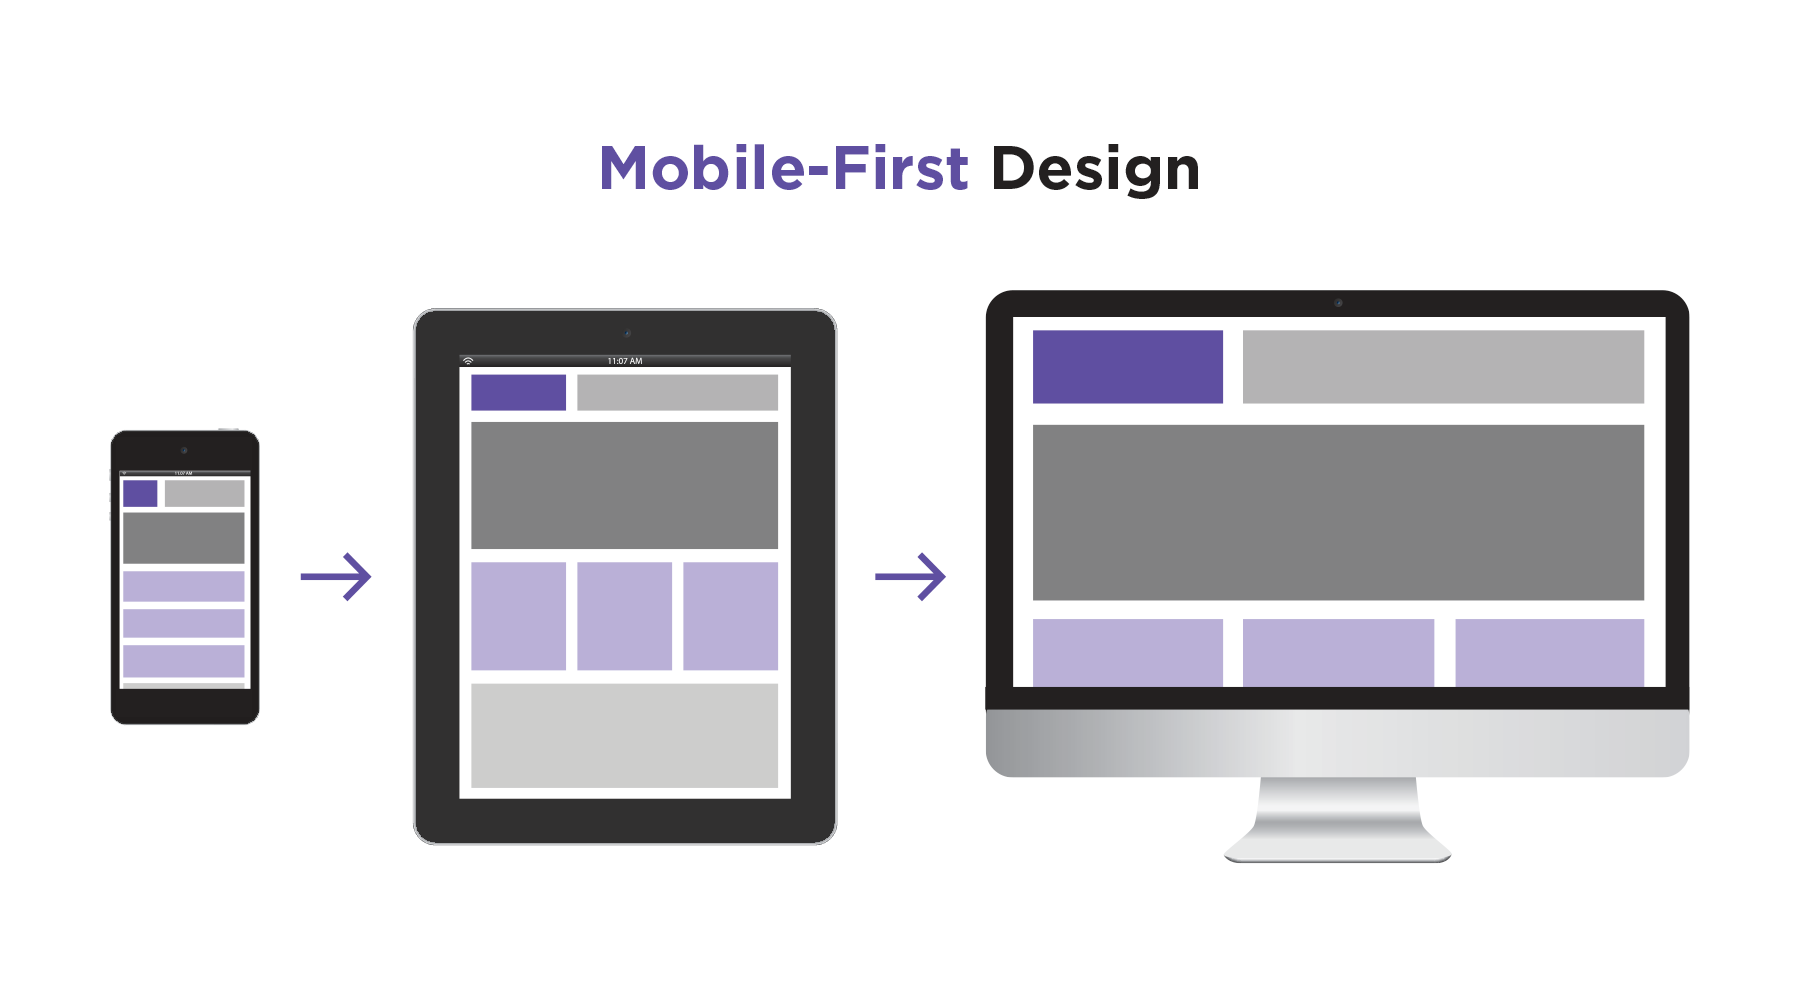 depicition of mobile-first design